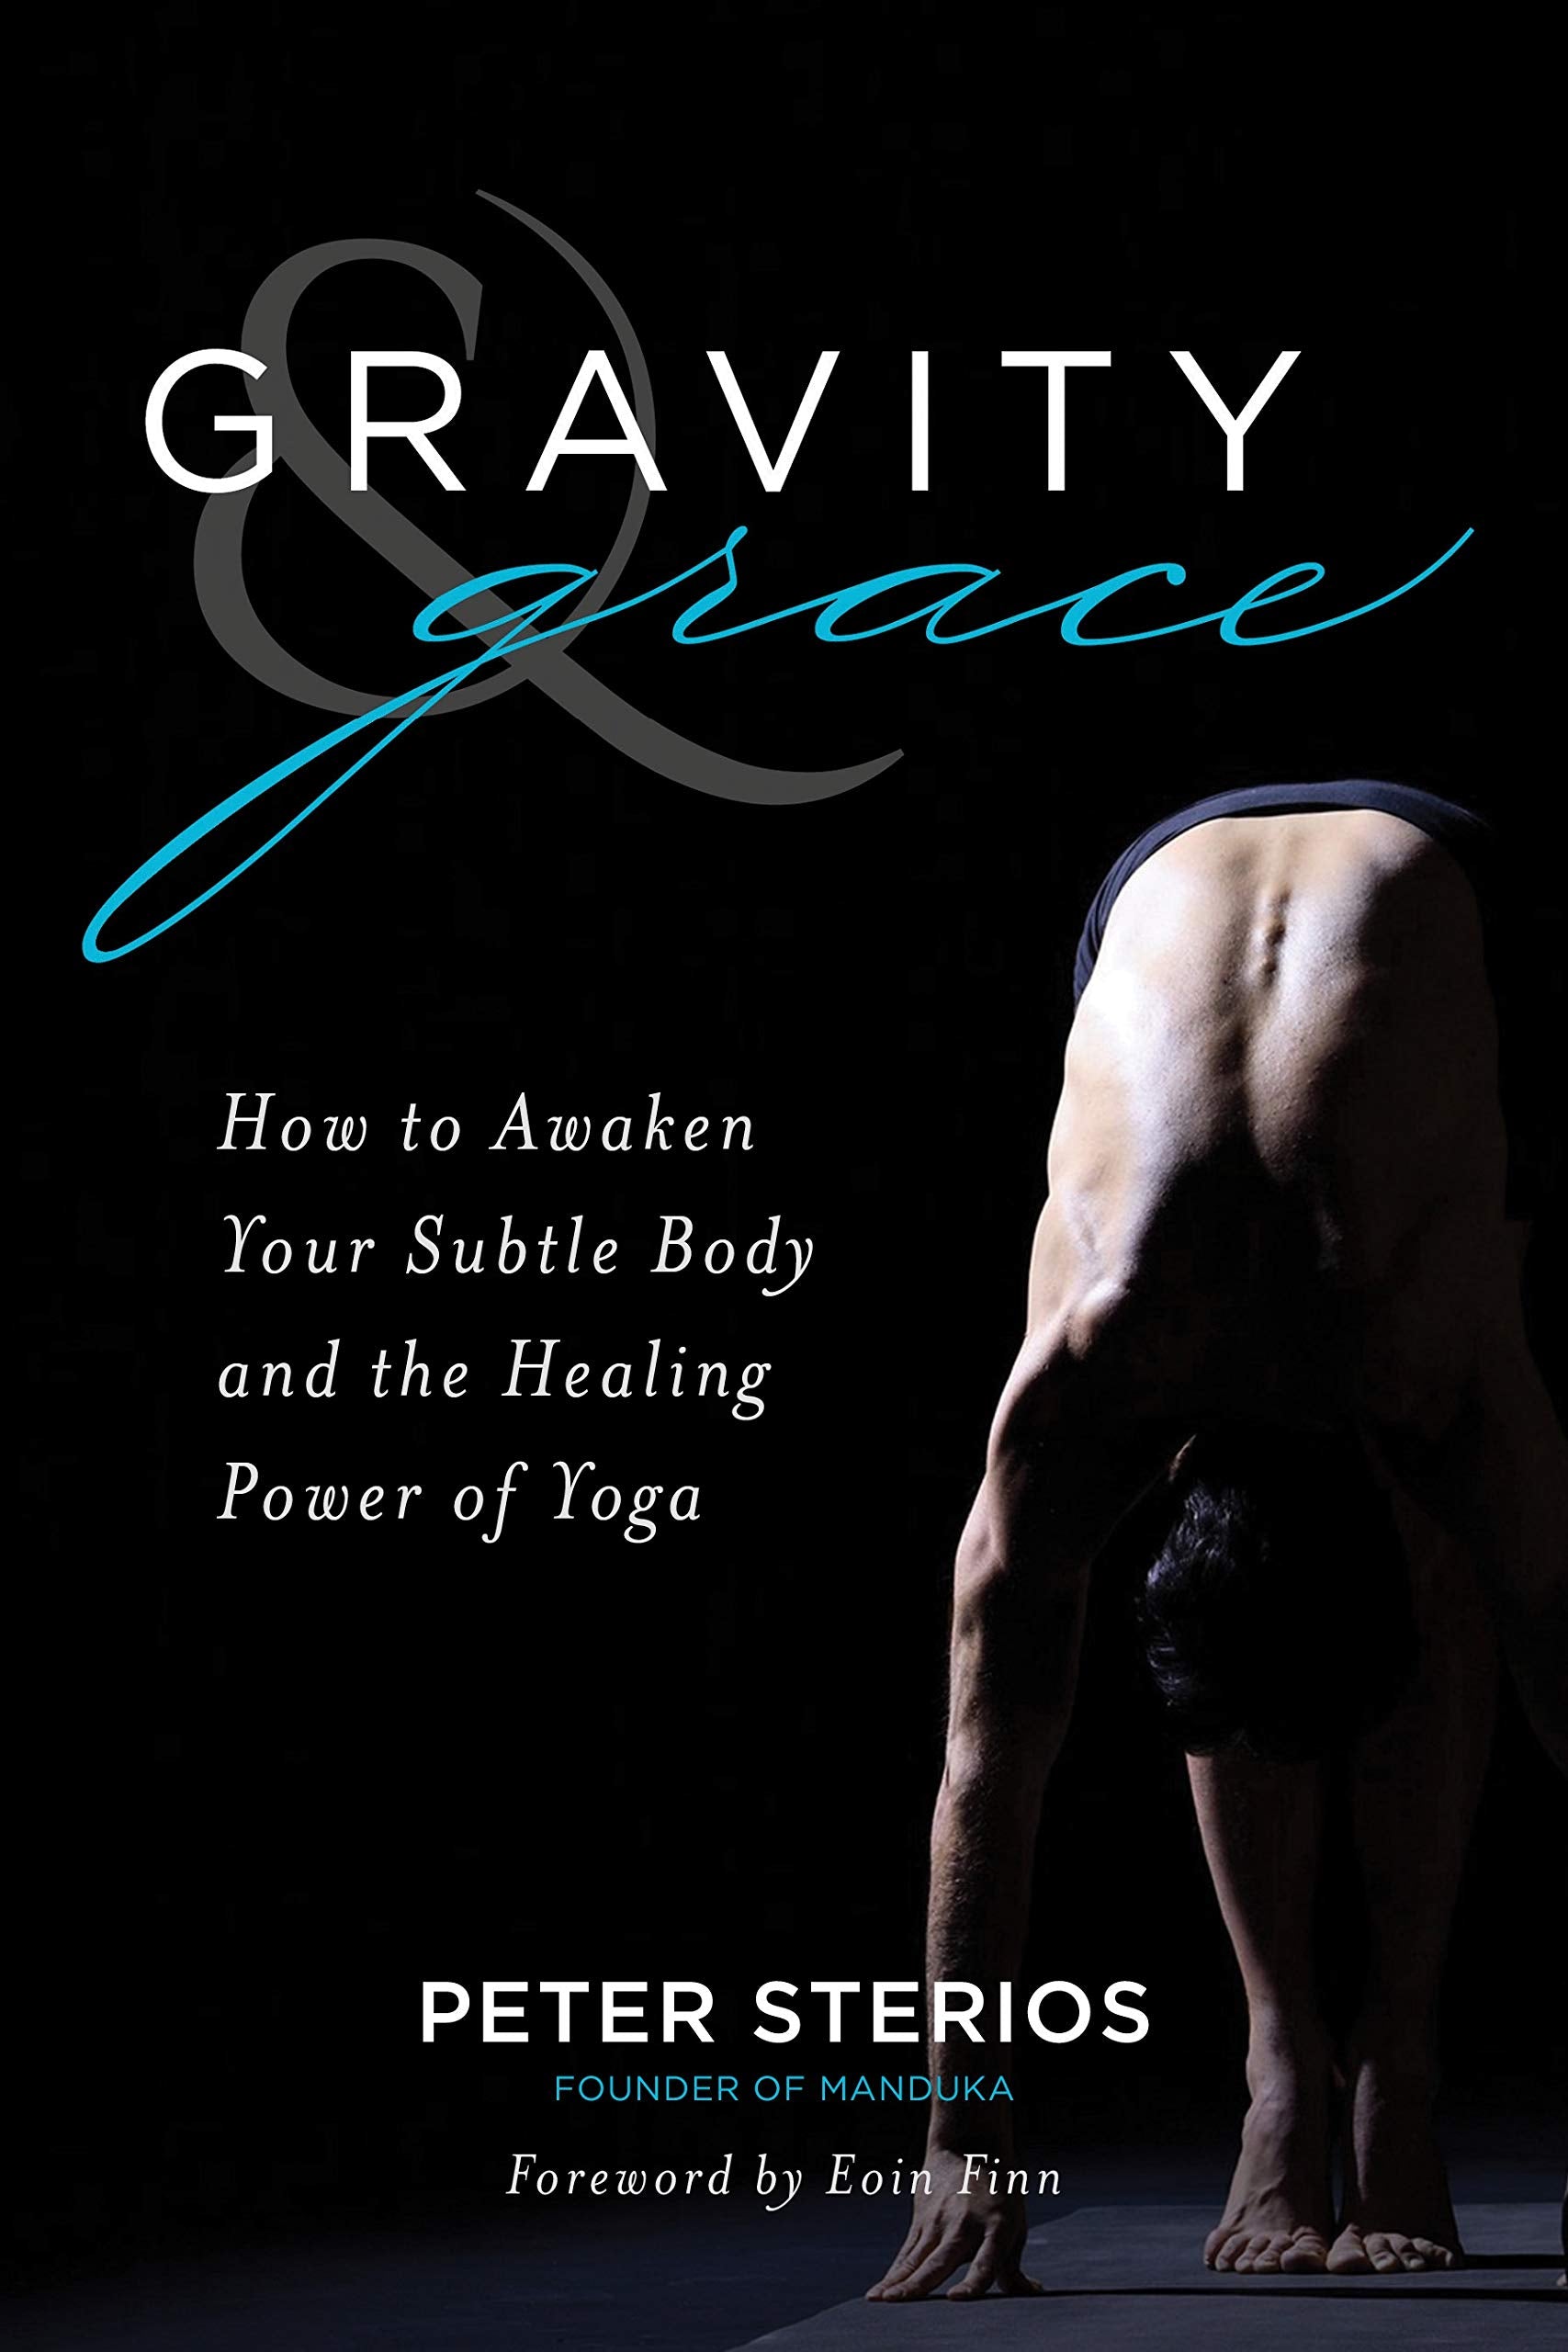 Gravity & Grace: How to Awaken Your Subtle Body with the Healing Power of Yoga